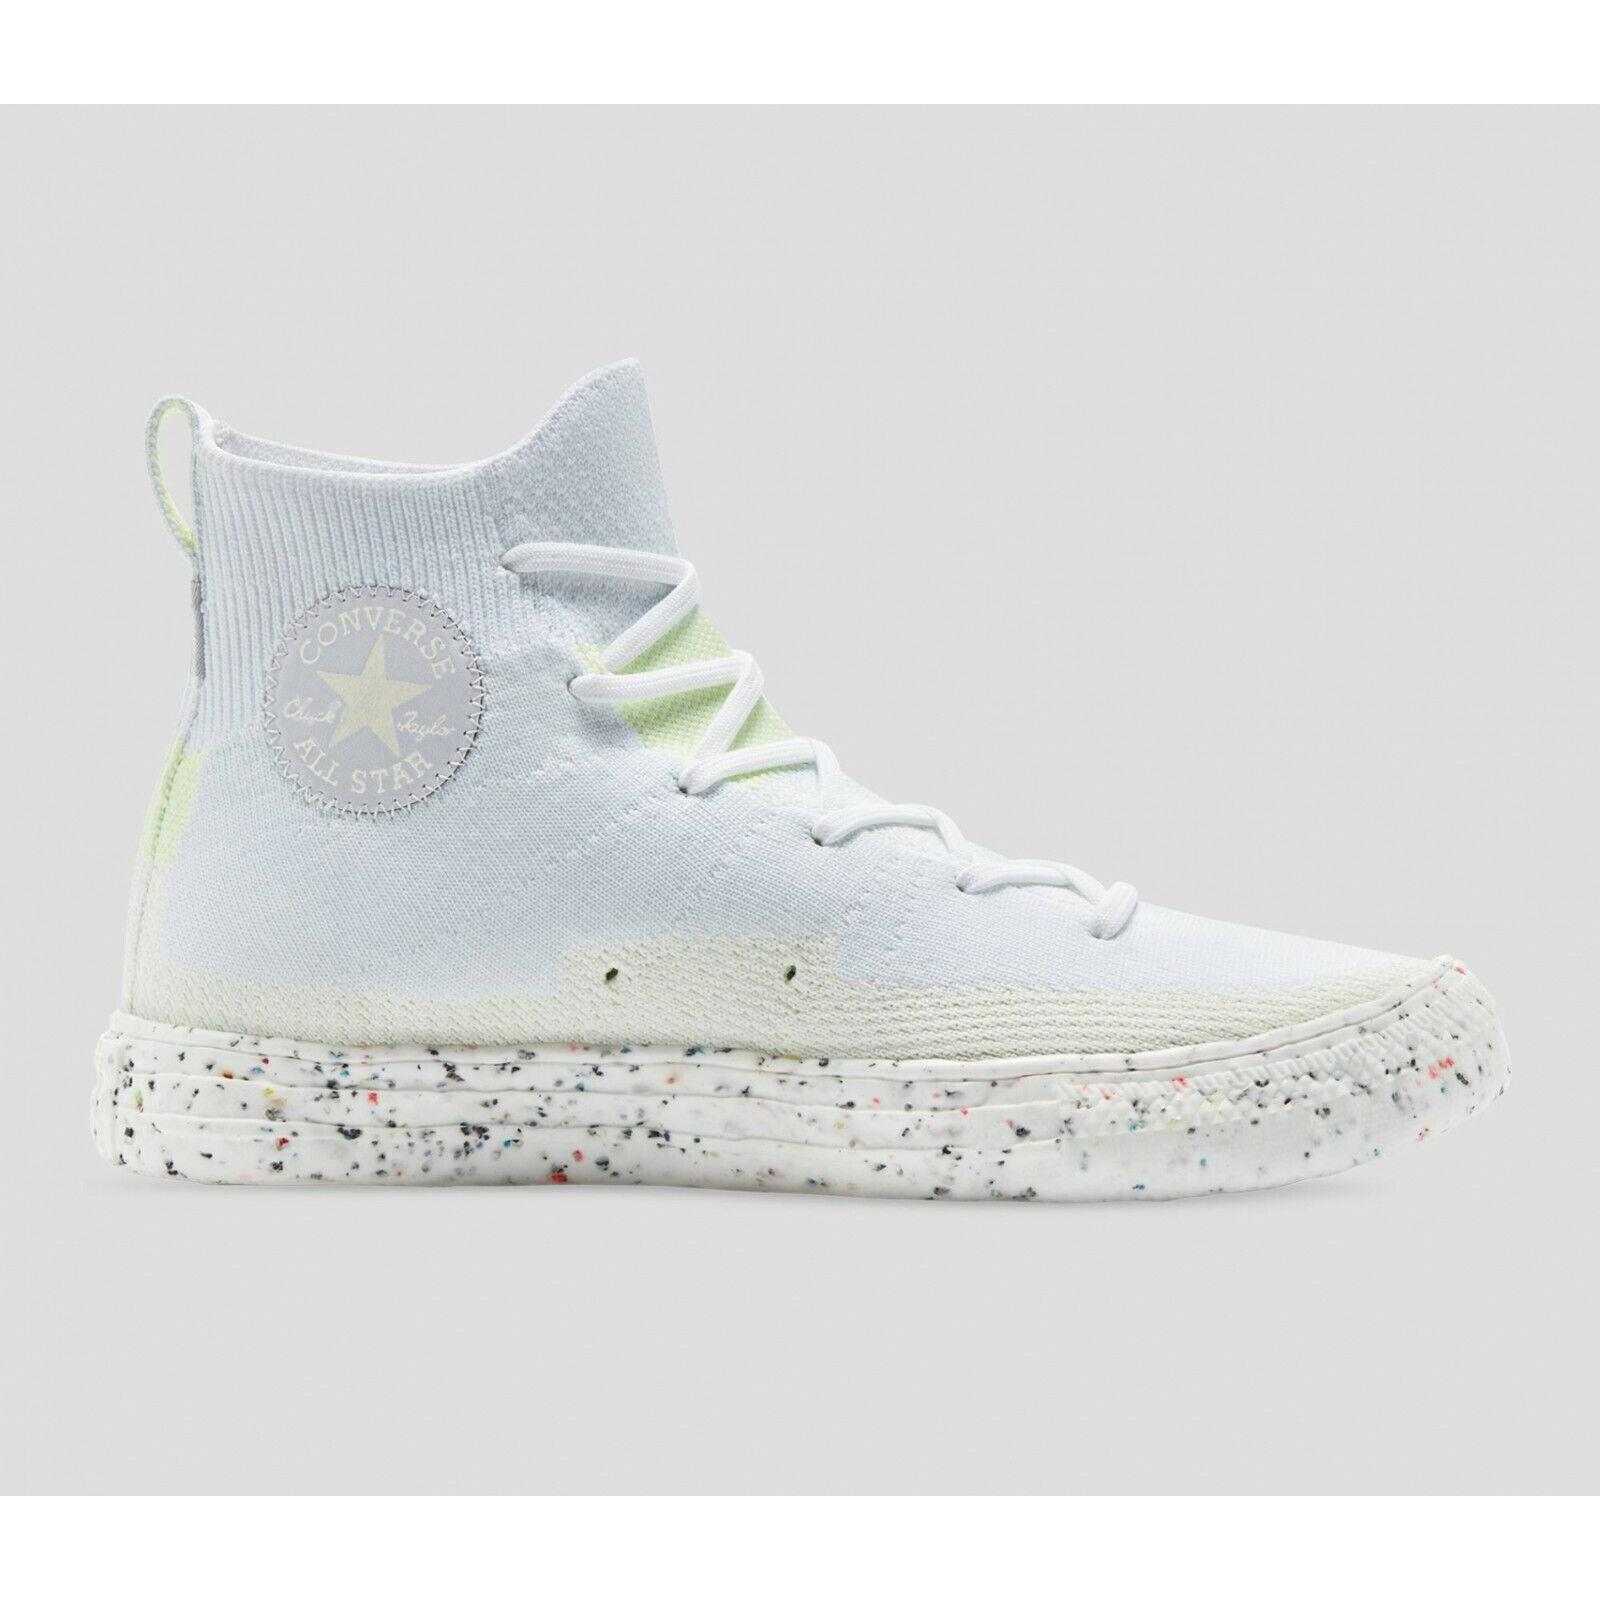 Converse Chuck Taylor All Star Hi Crater Knit 170368C Unisex White Shoes HS564